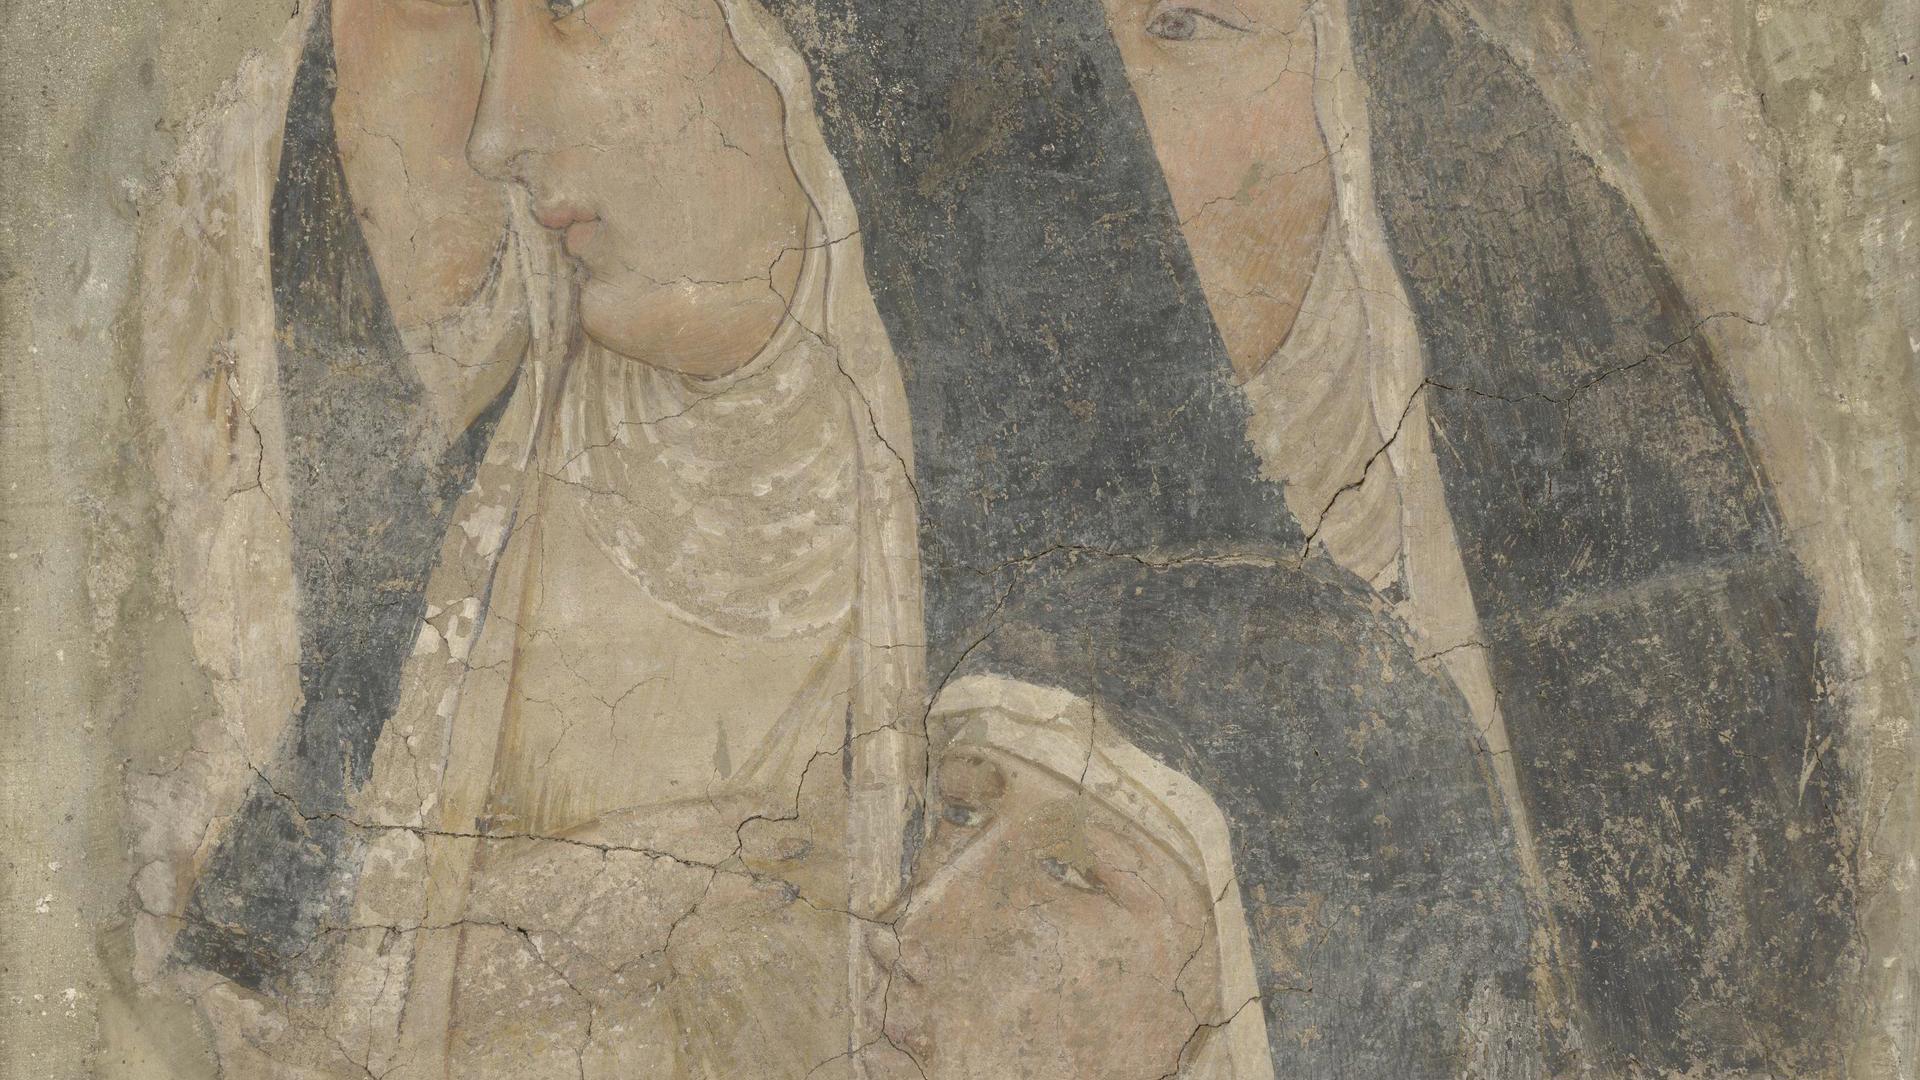 A Group of Four Poor Clares by Ambrogio Lorenzetti